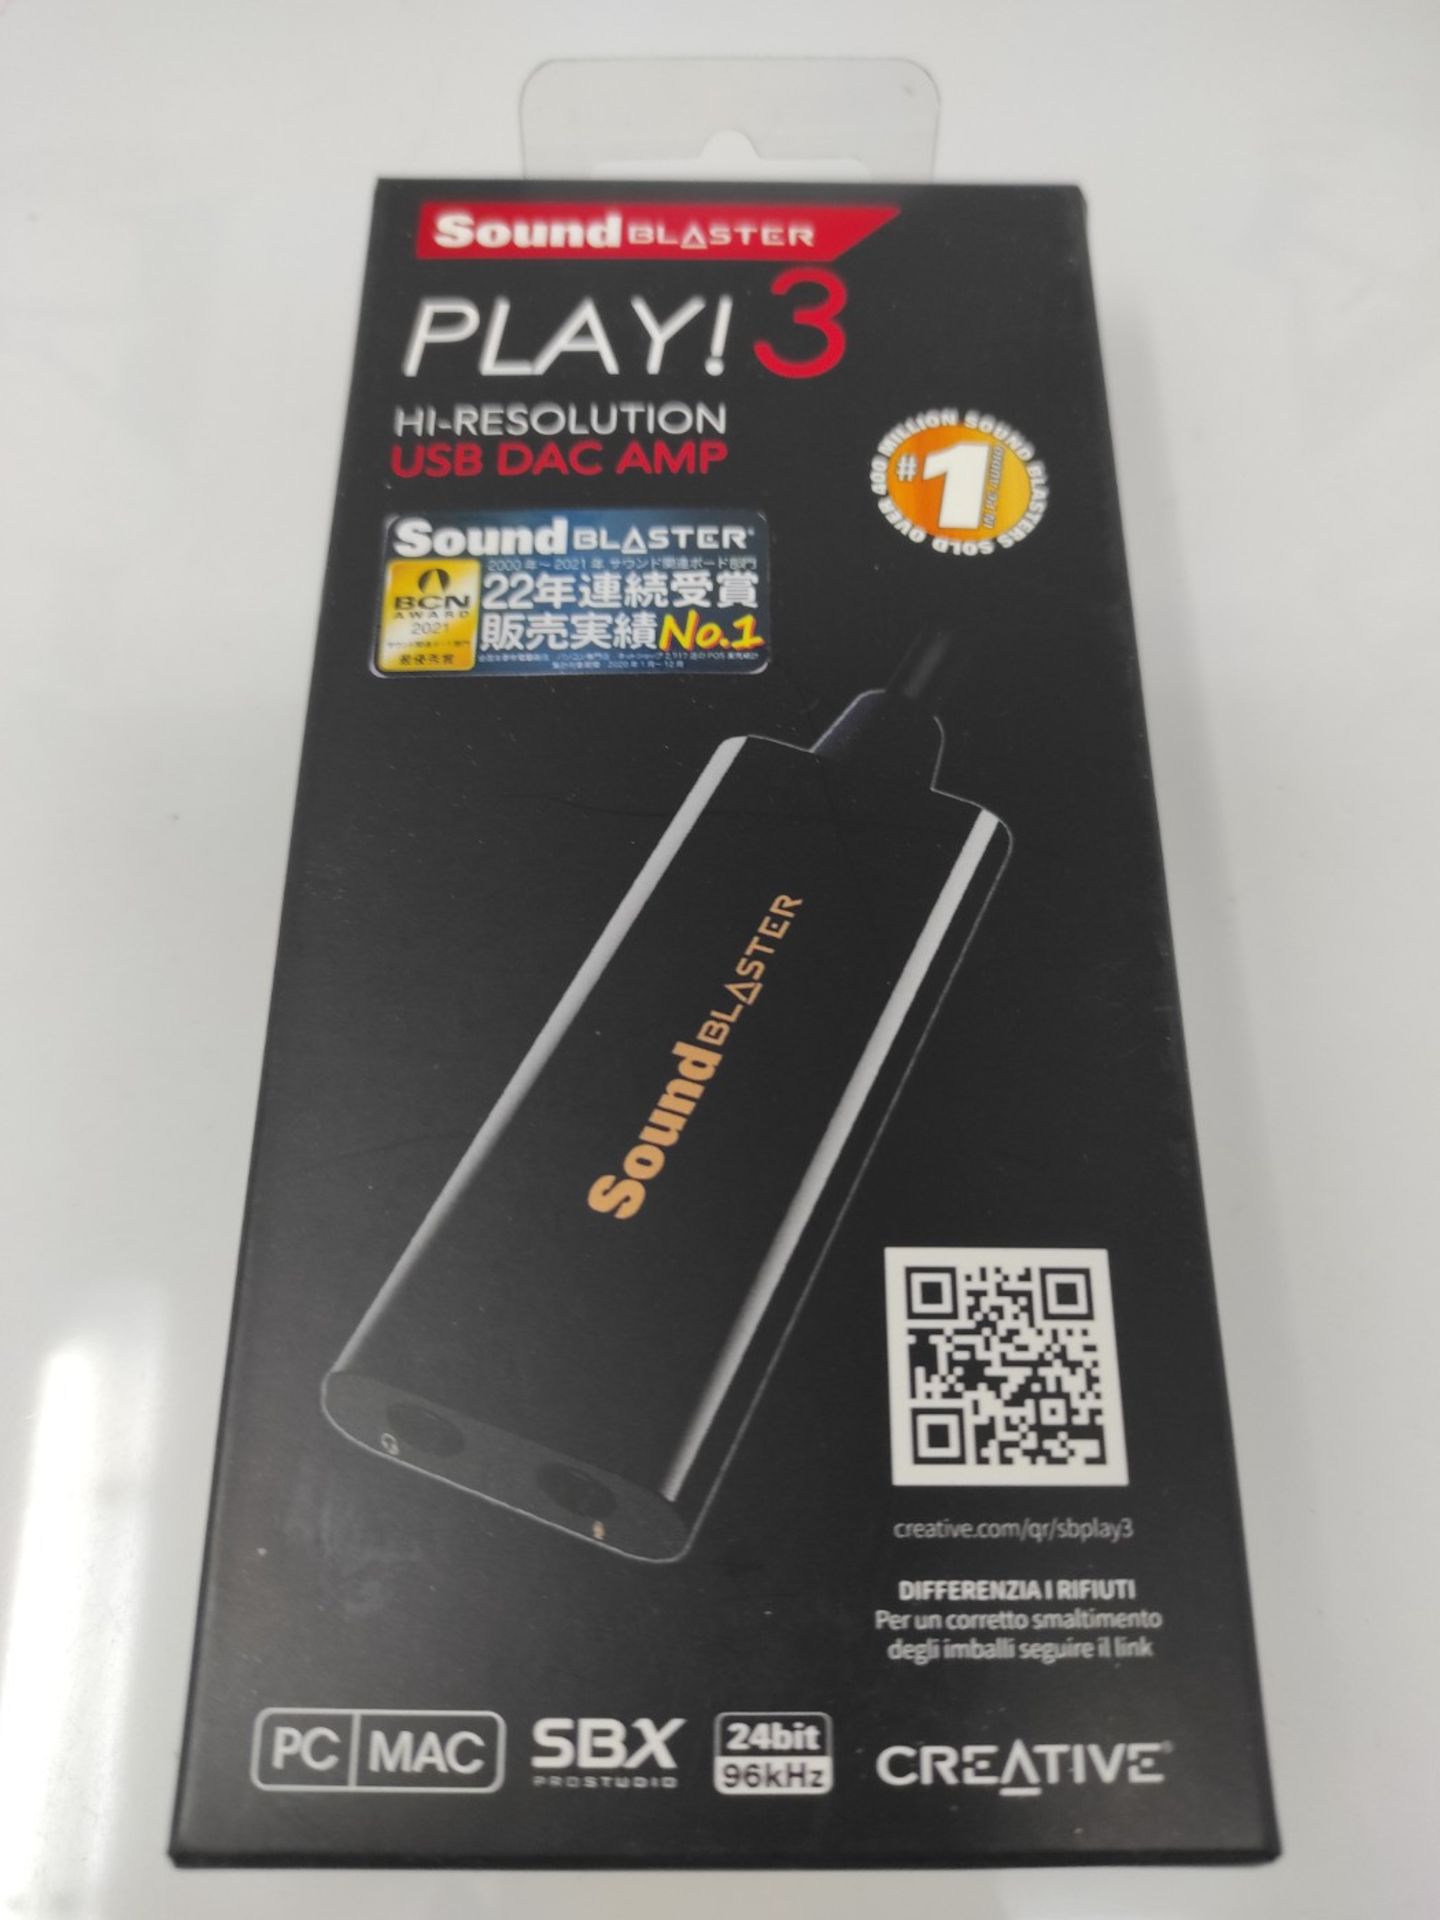 [NEW] Creative Sound Blaster Play!3 - USB-DAC amplifier and external sound card, black - Image 2 of 2